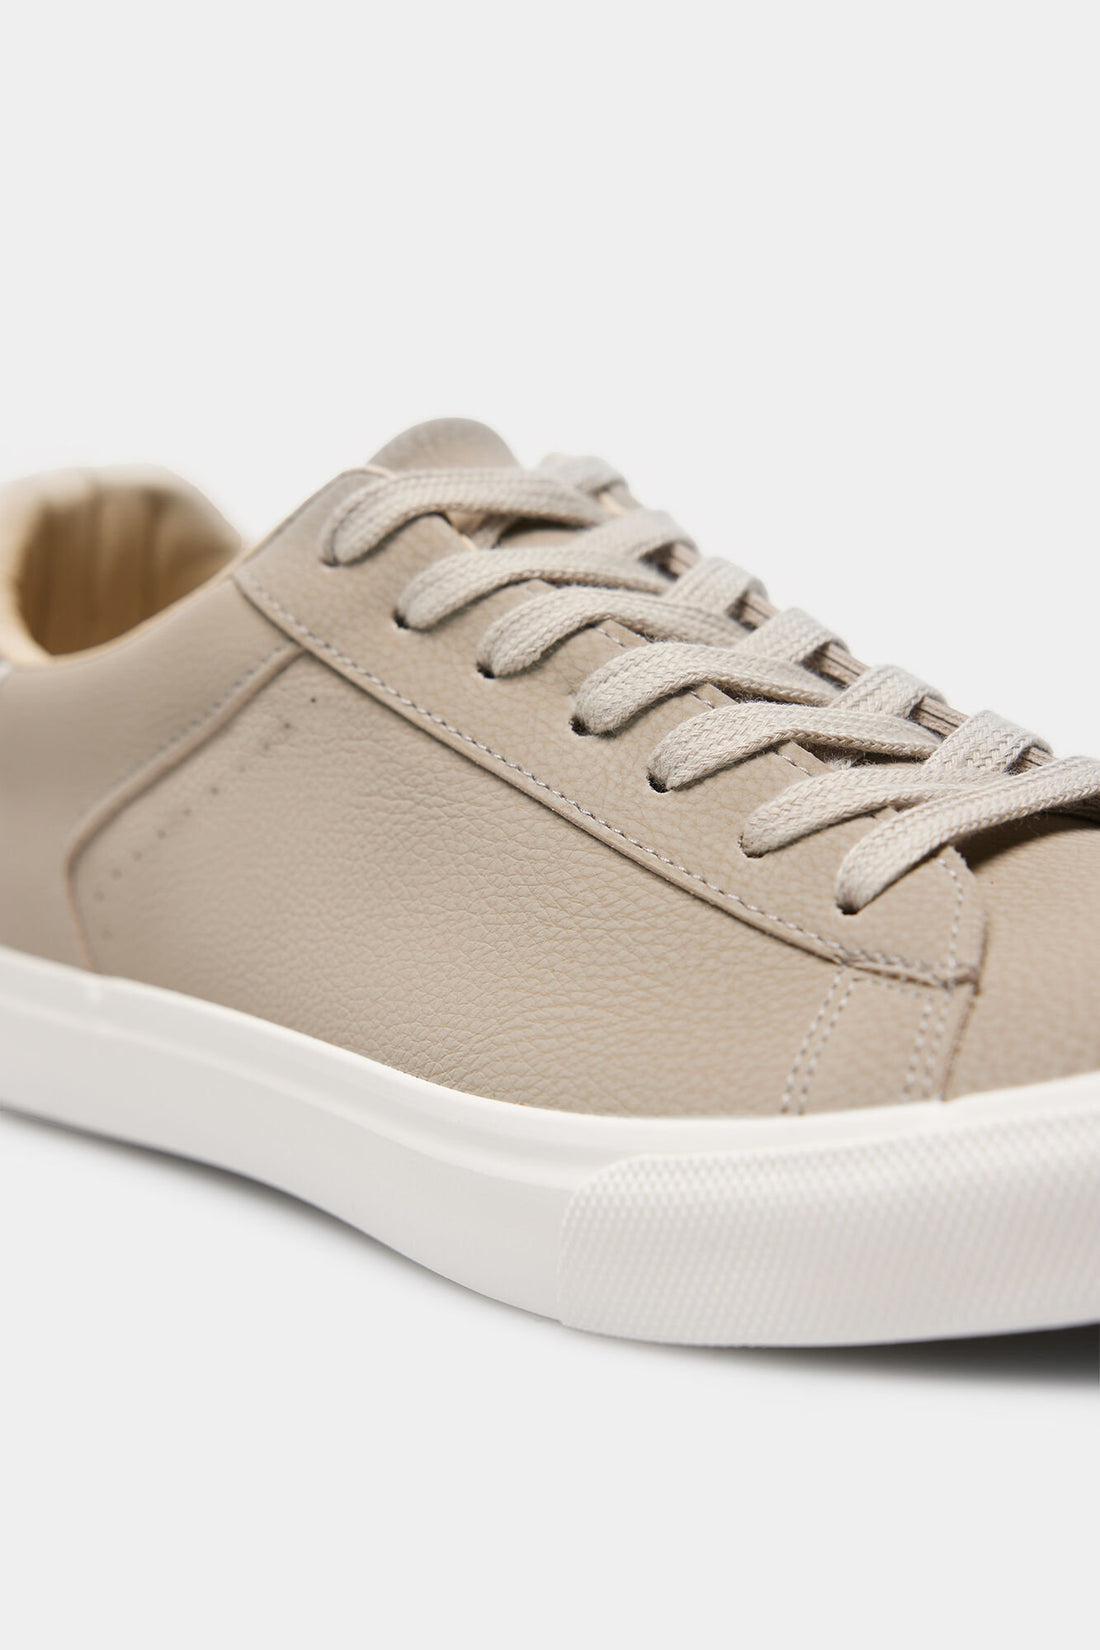 Beige Lace Up Trainers With White Sole_2997584_41_02